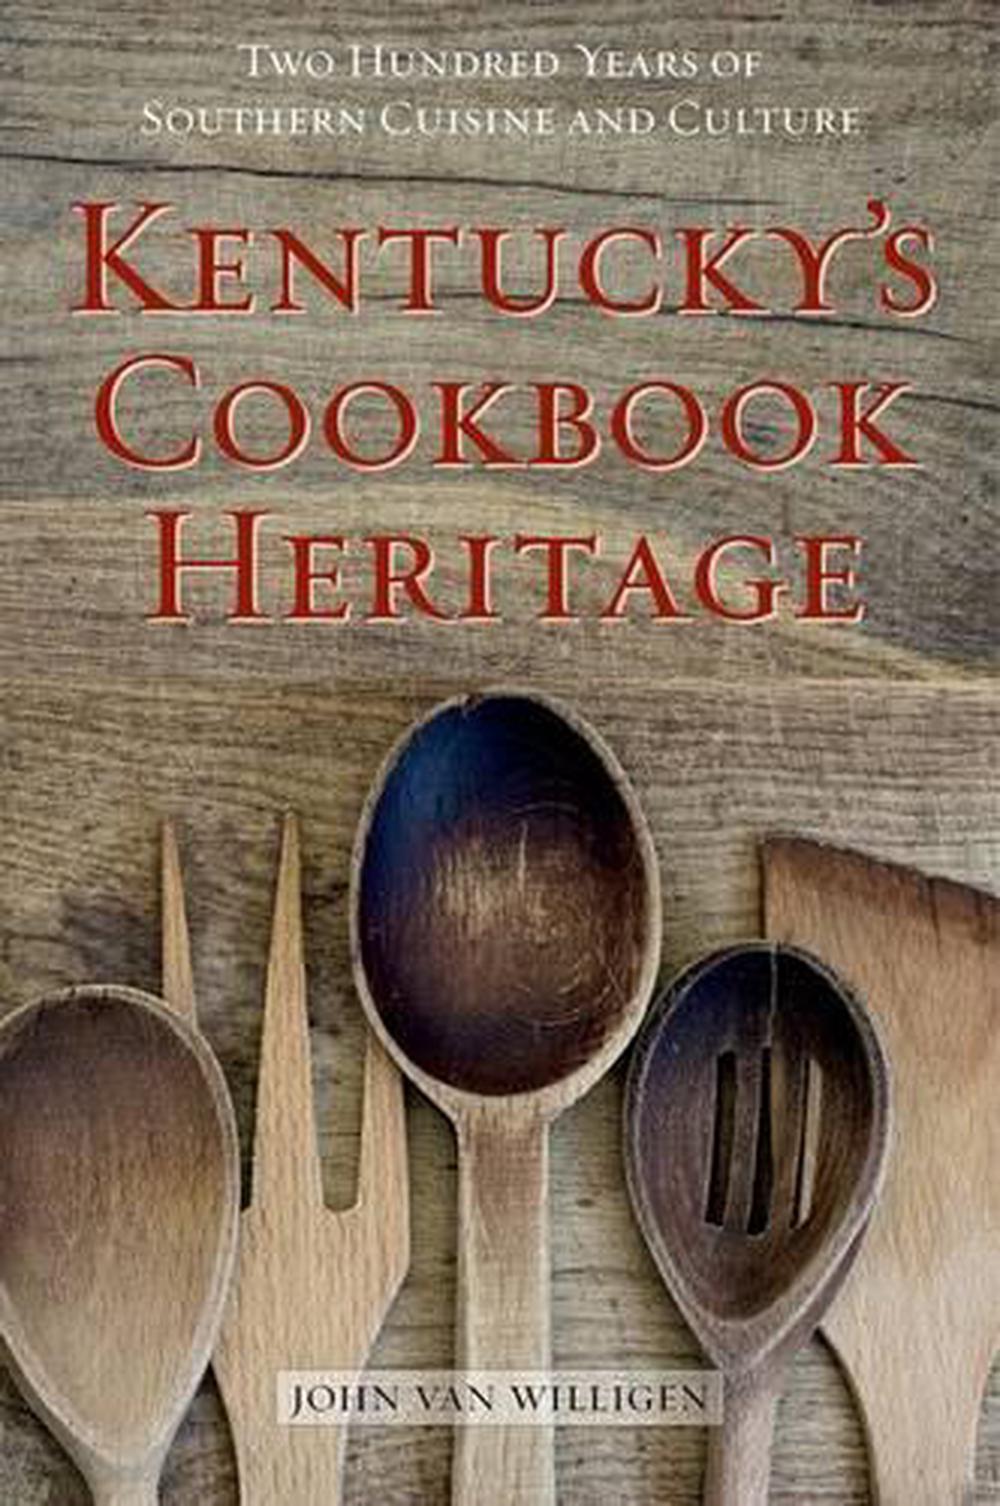 Kentucky's Cookbook Heritage: Two Hundred Years of ...